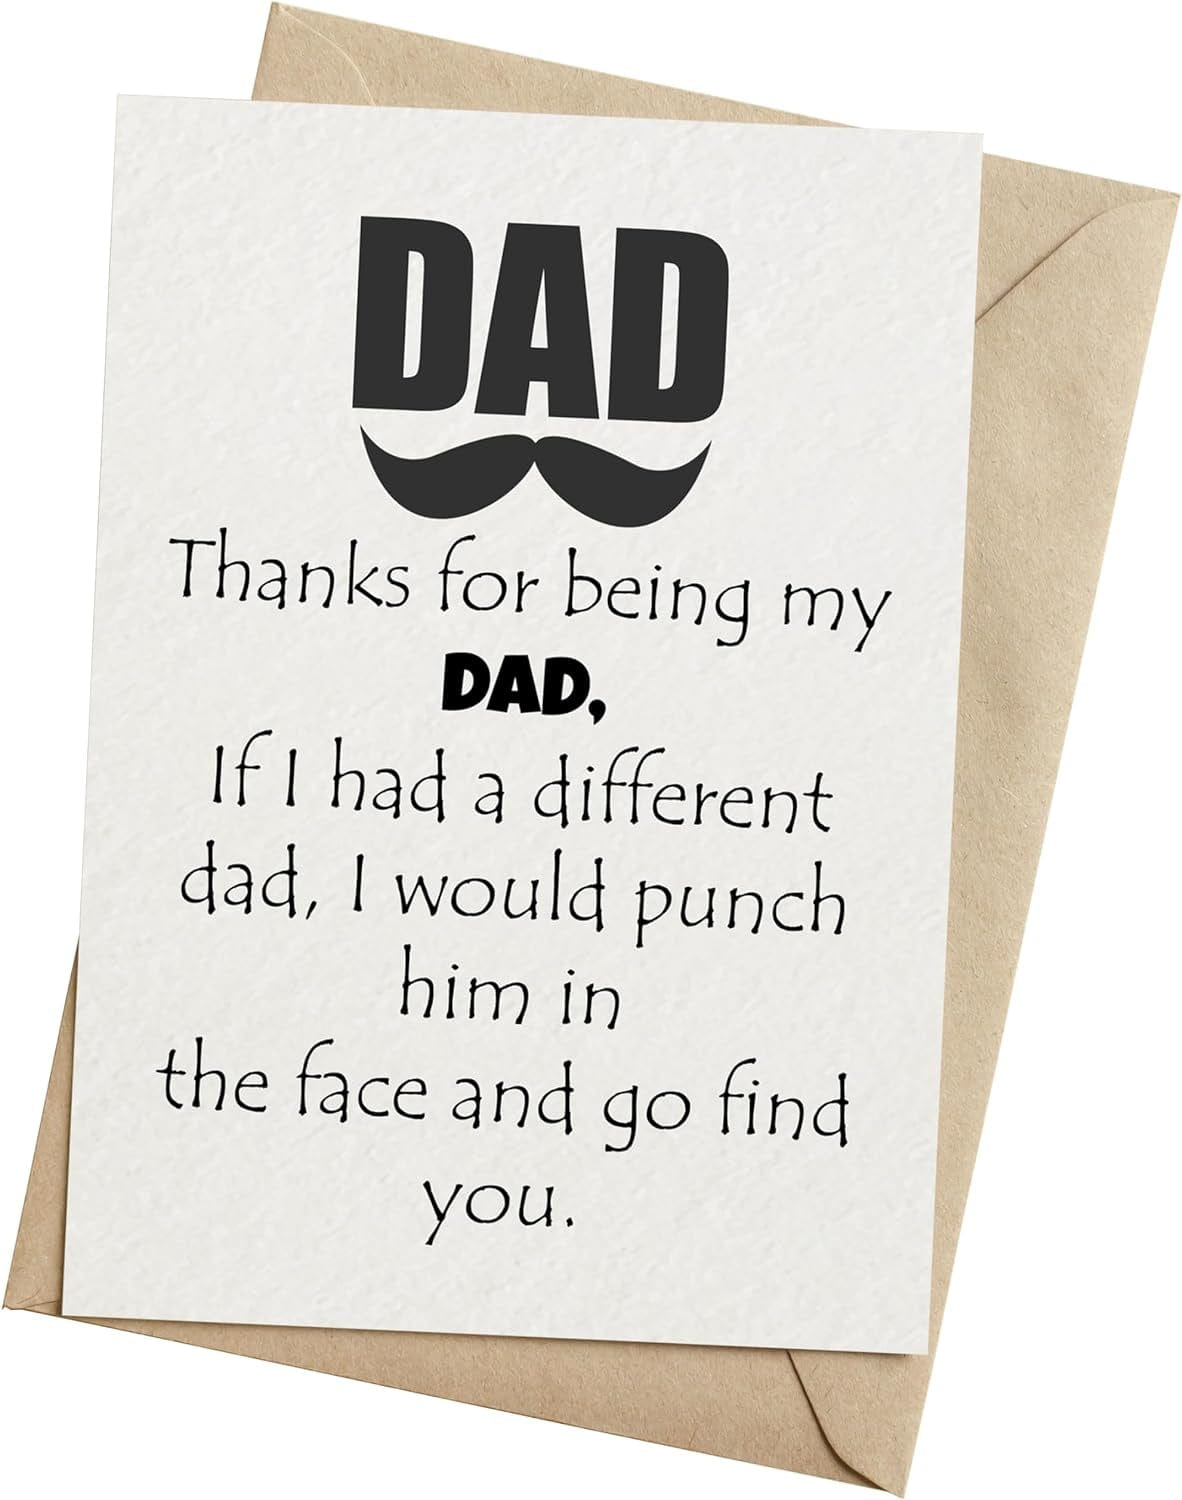 GeckoCustom Thanks for Being My DAD Card - Fathers Day Card from Son, Daughter, Kids, Birthday Card - Size 5X7 Inch Folded Card Include Envelope, Sticker - Blank inside - Funny, Unique & Romantic Card